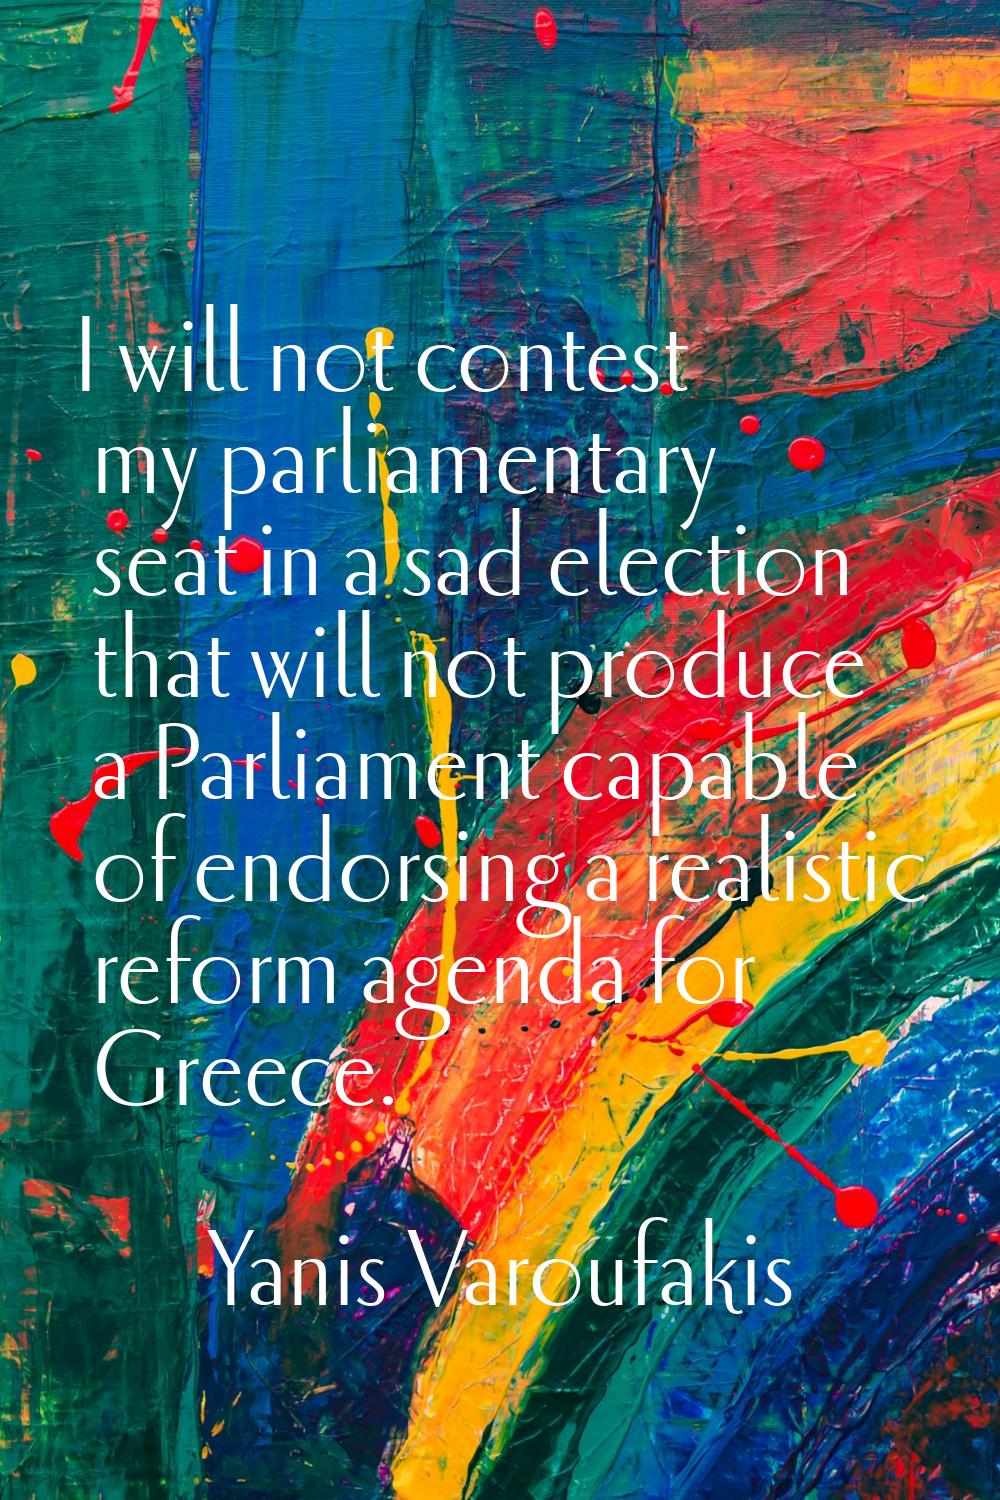 I will not contest my parliamentary seat in a sad election that will not produce a Parliament capab